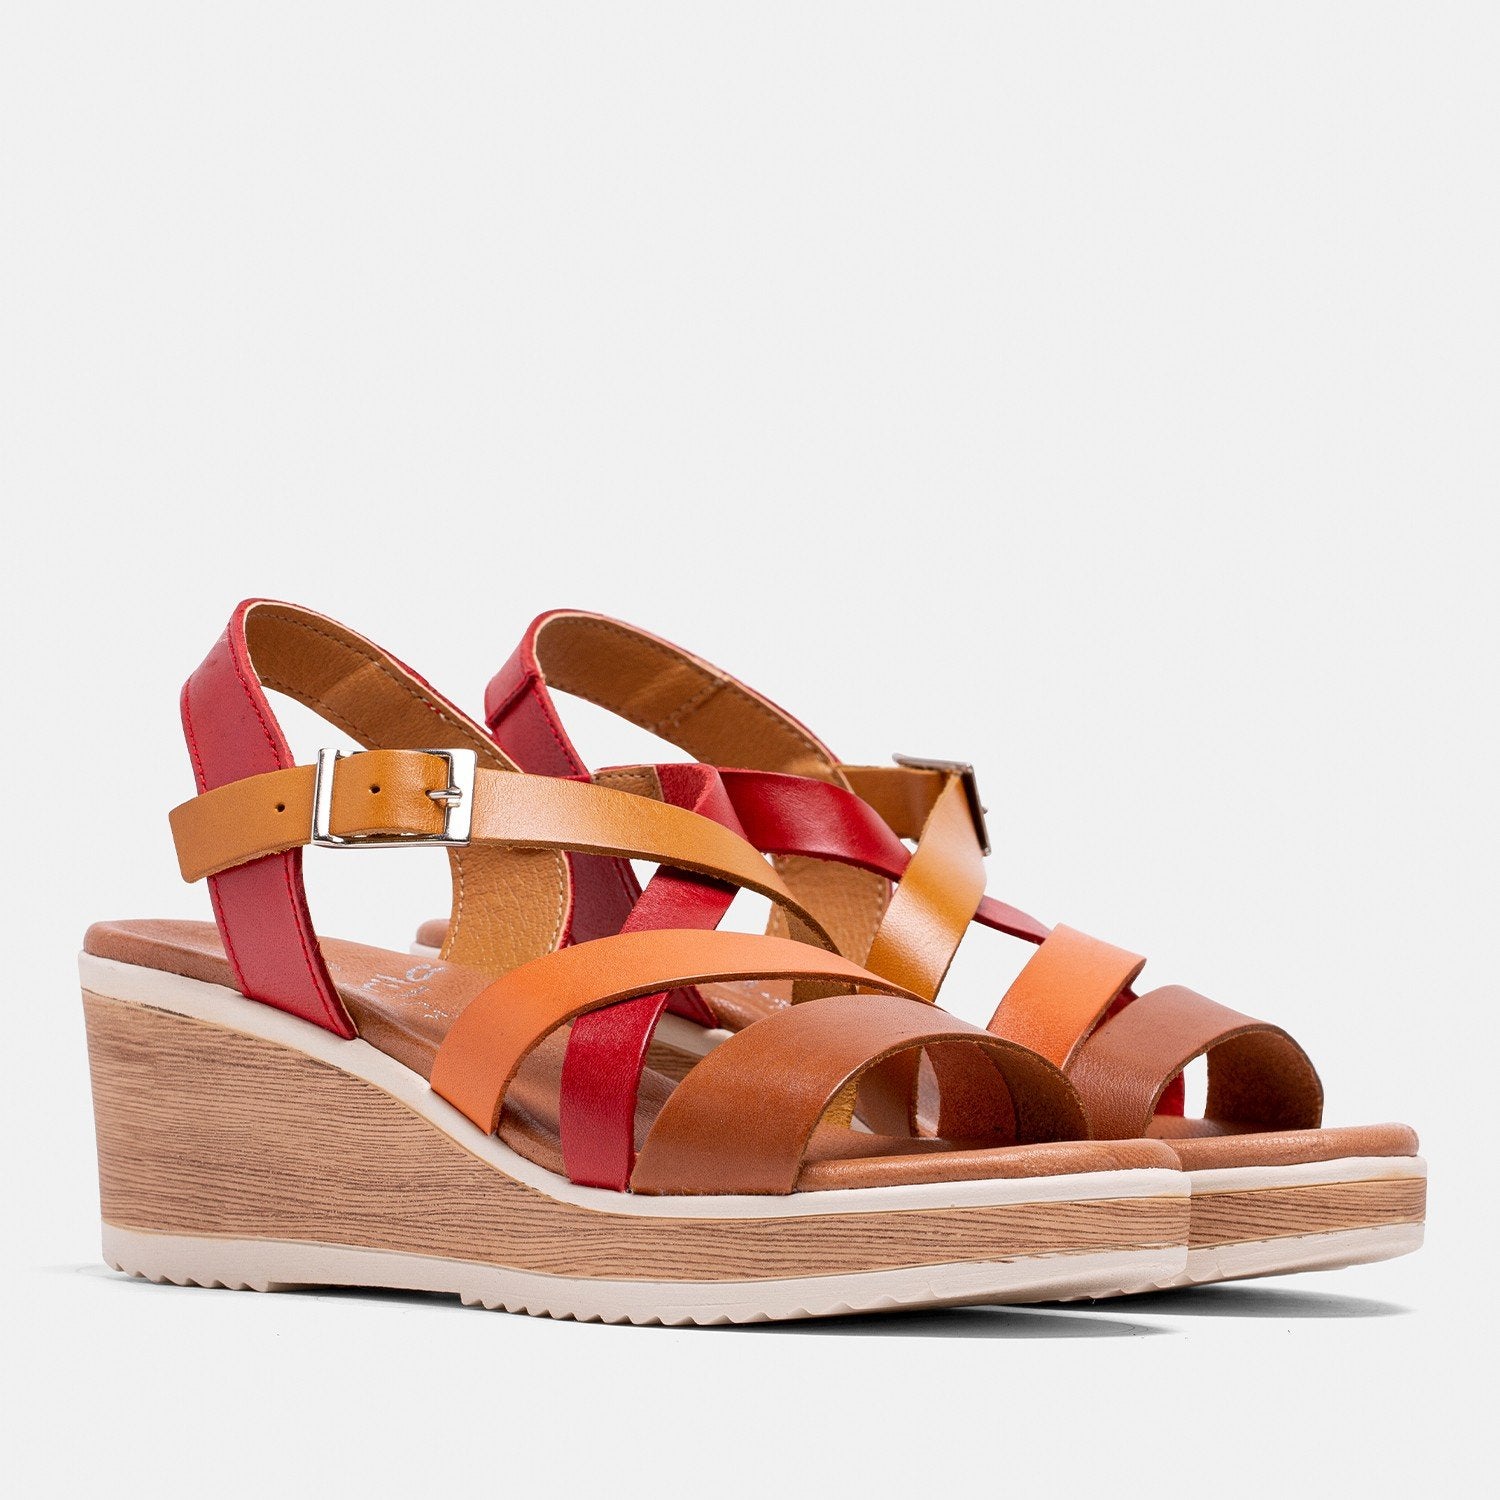 Marila Wedges and Sandals main category image by Antipodas Brands